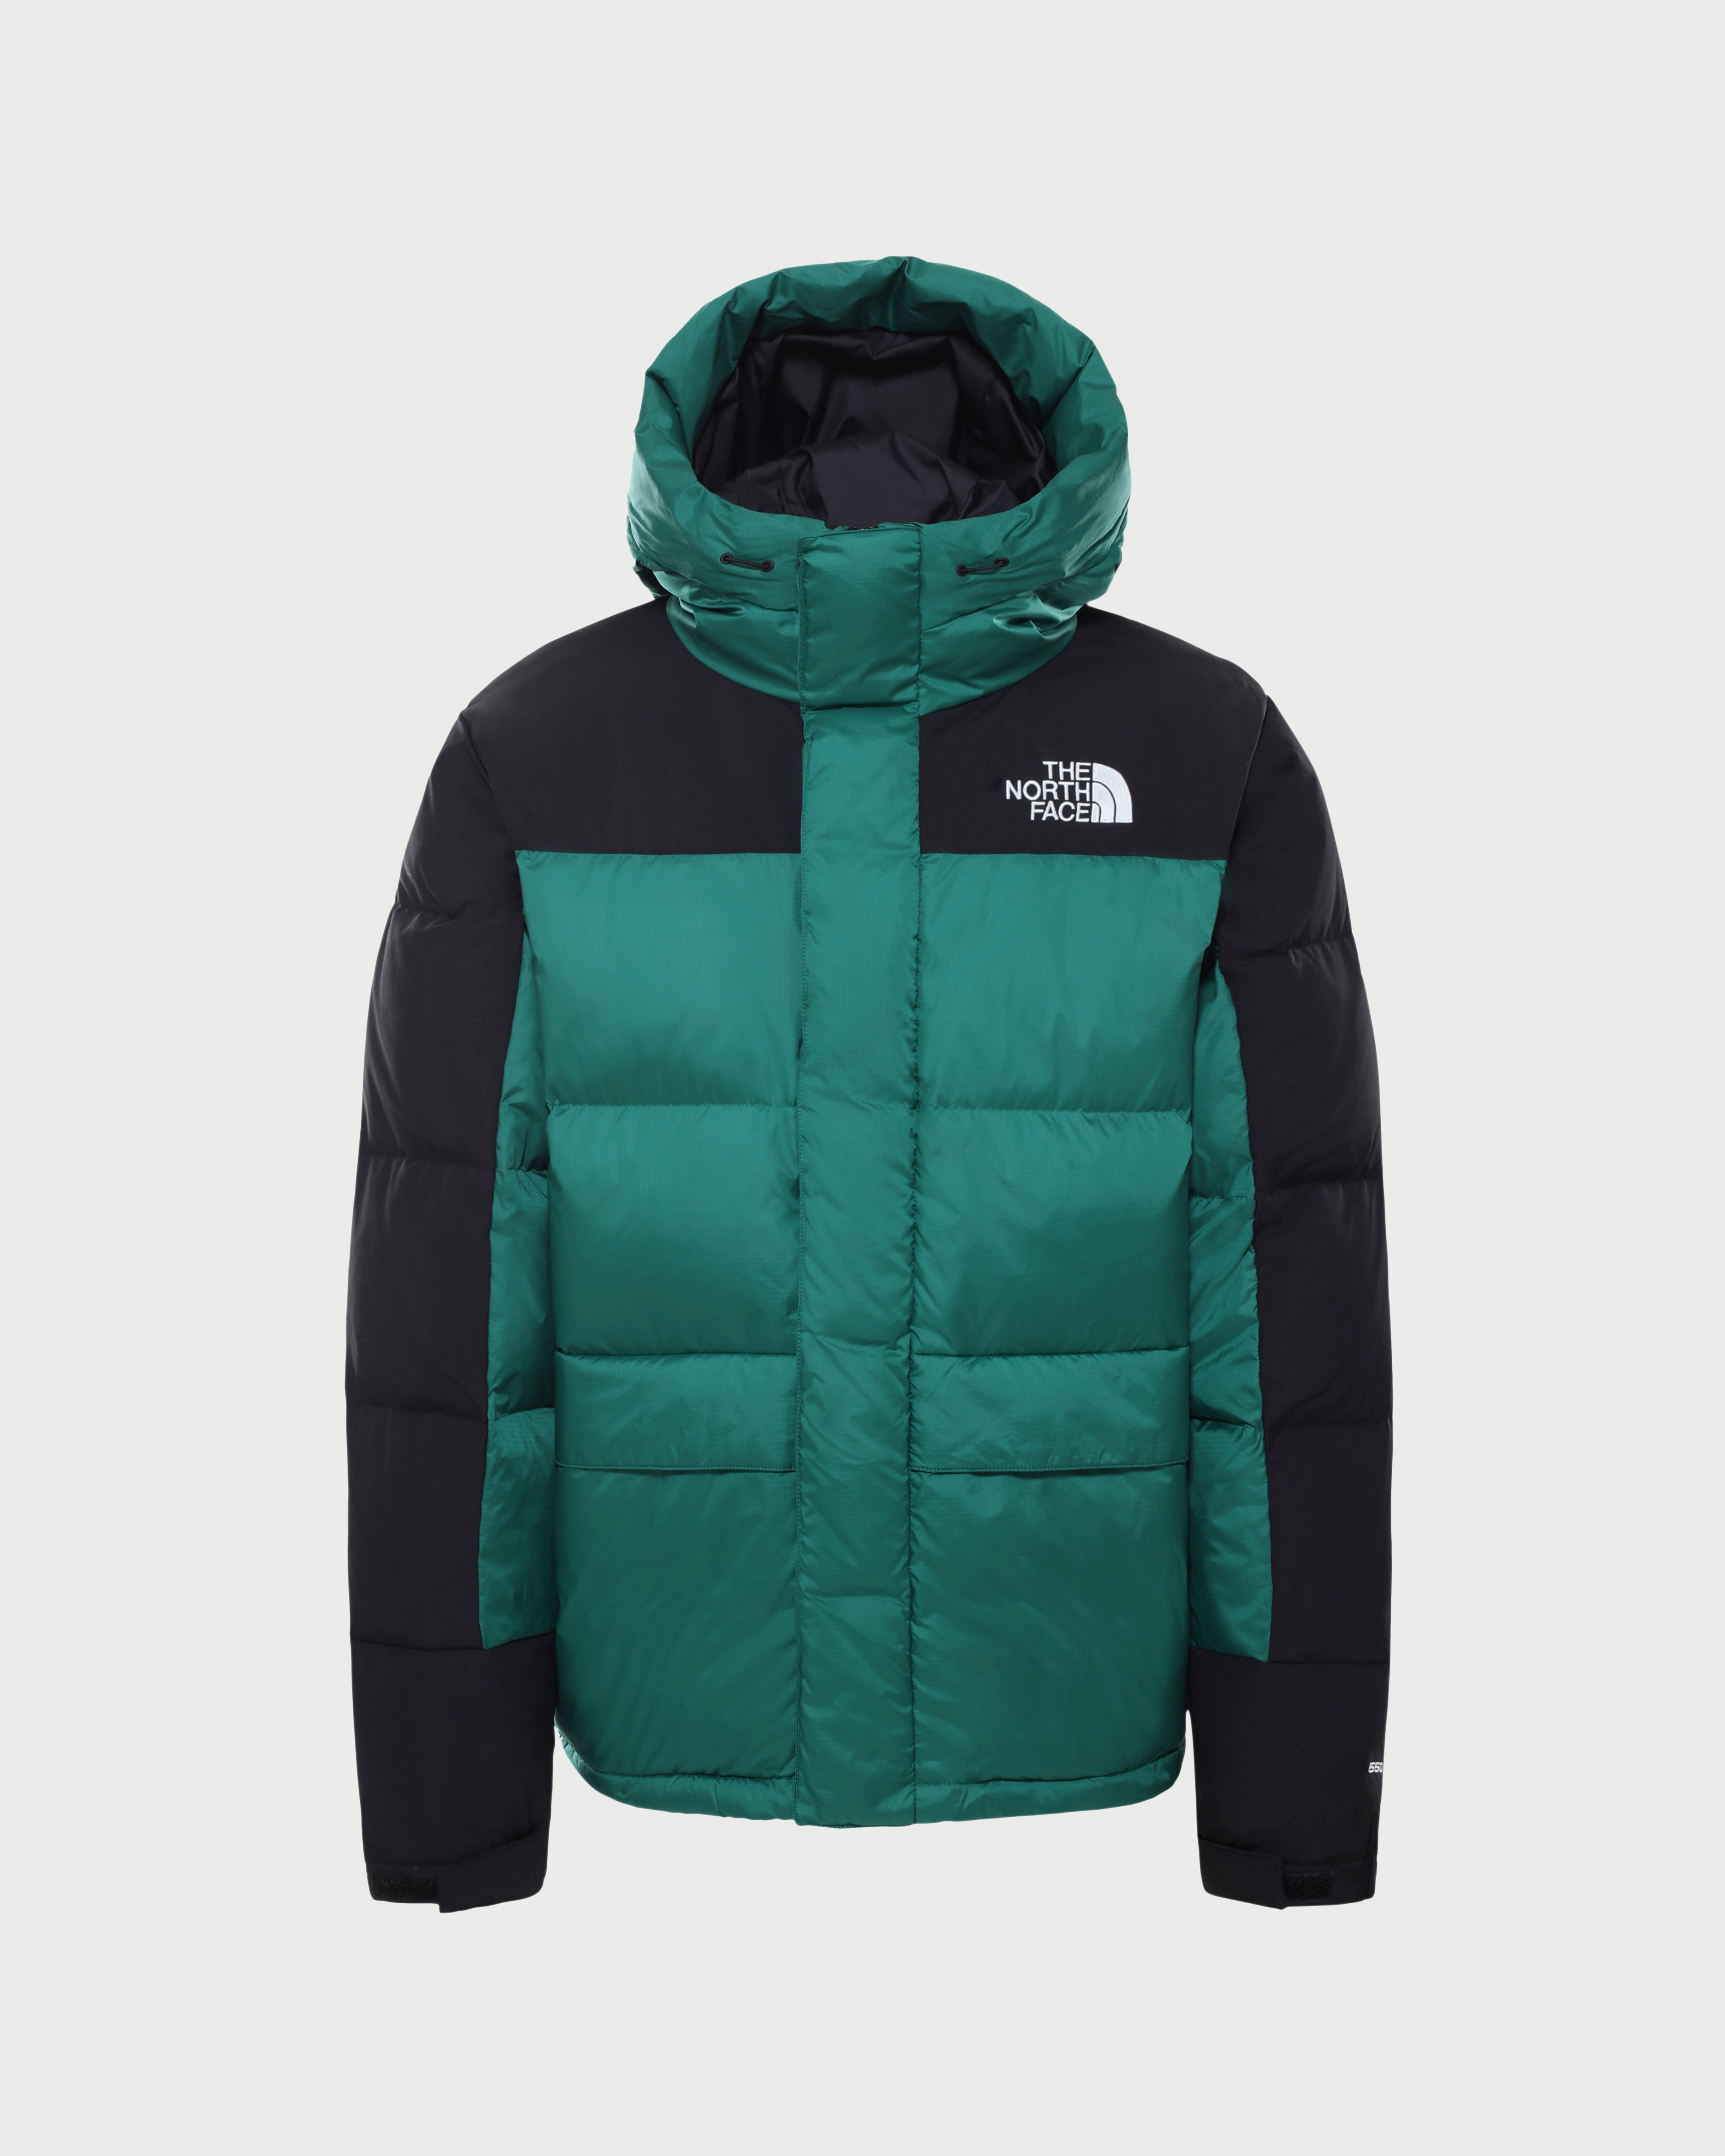 The North Face - Himalayan Down Jacket Peak Evergreen Unisex - Clothing - Green - Image 1